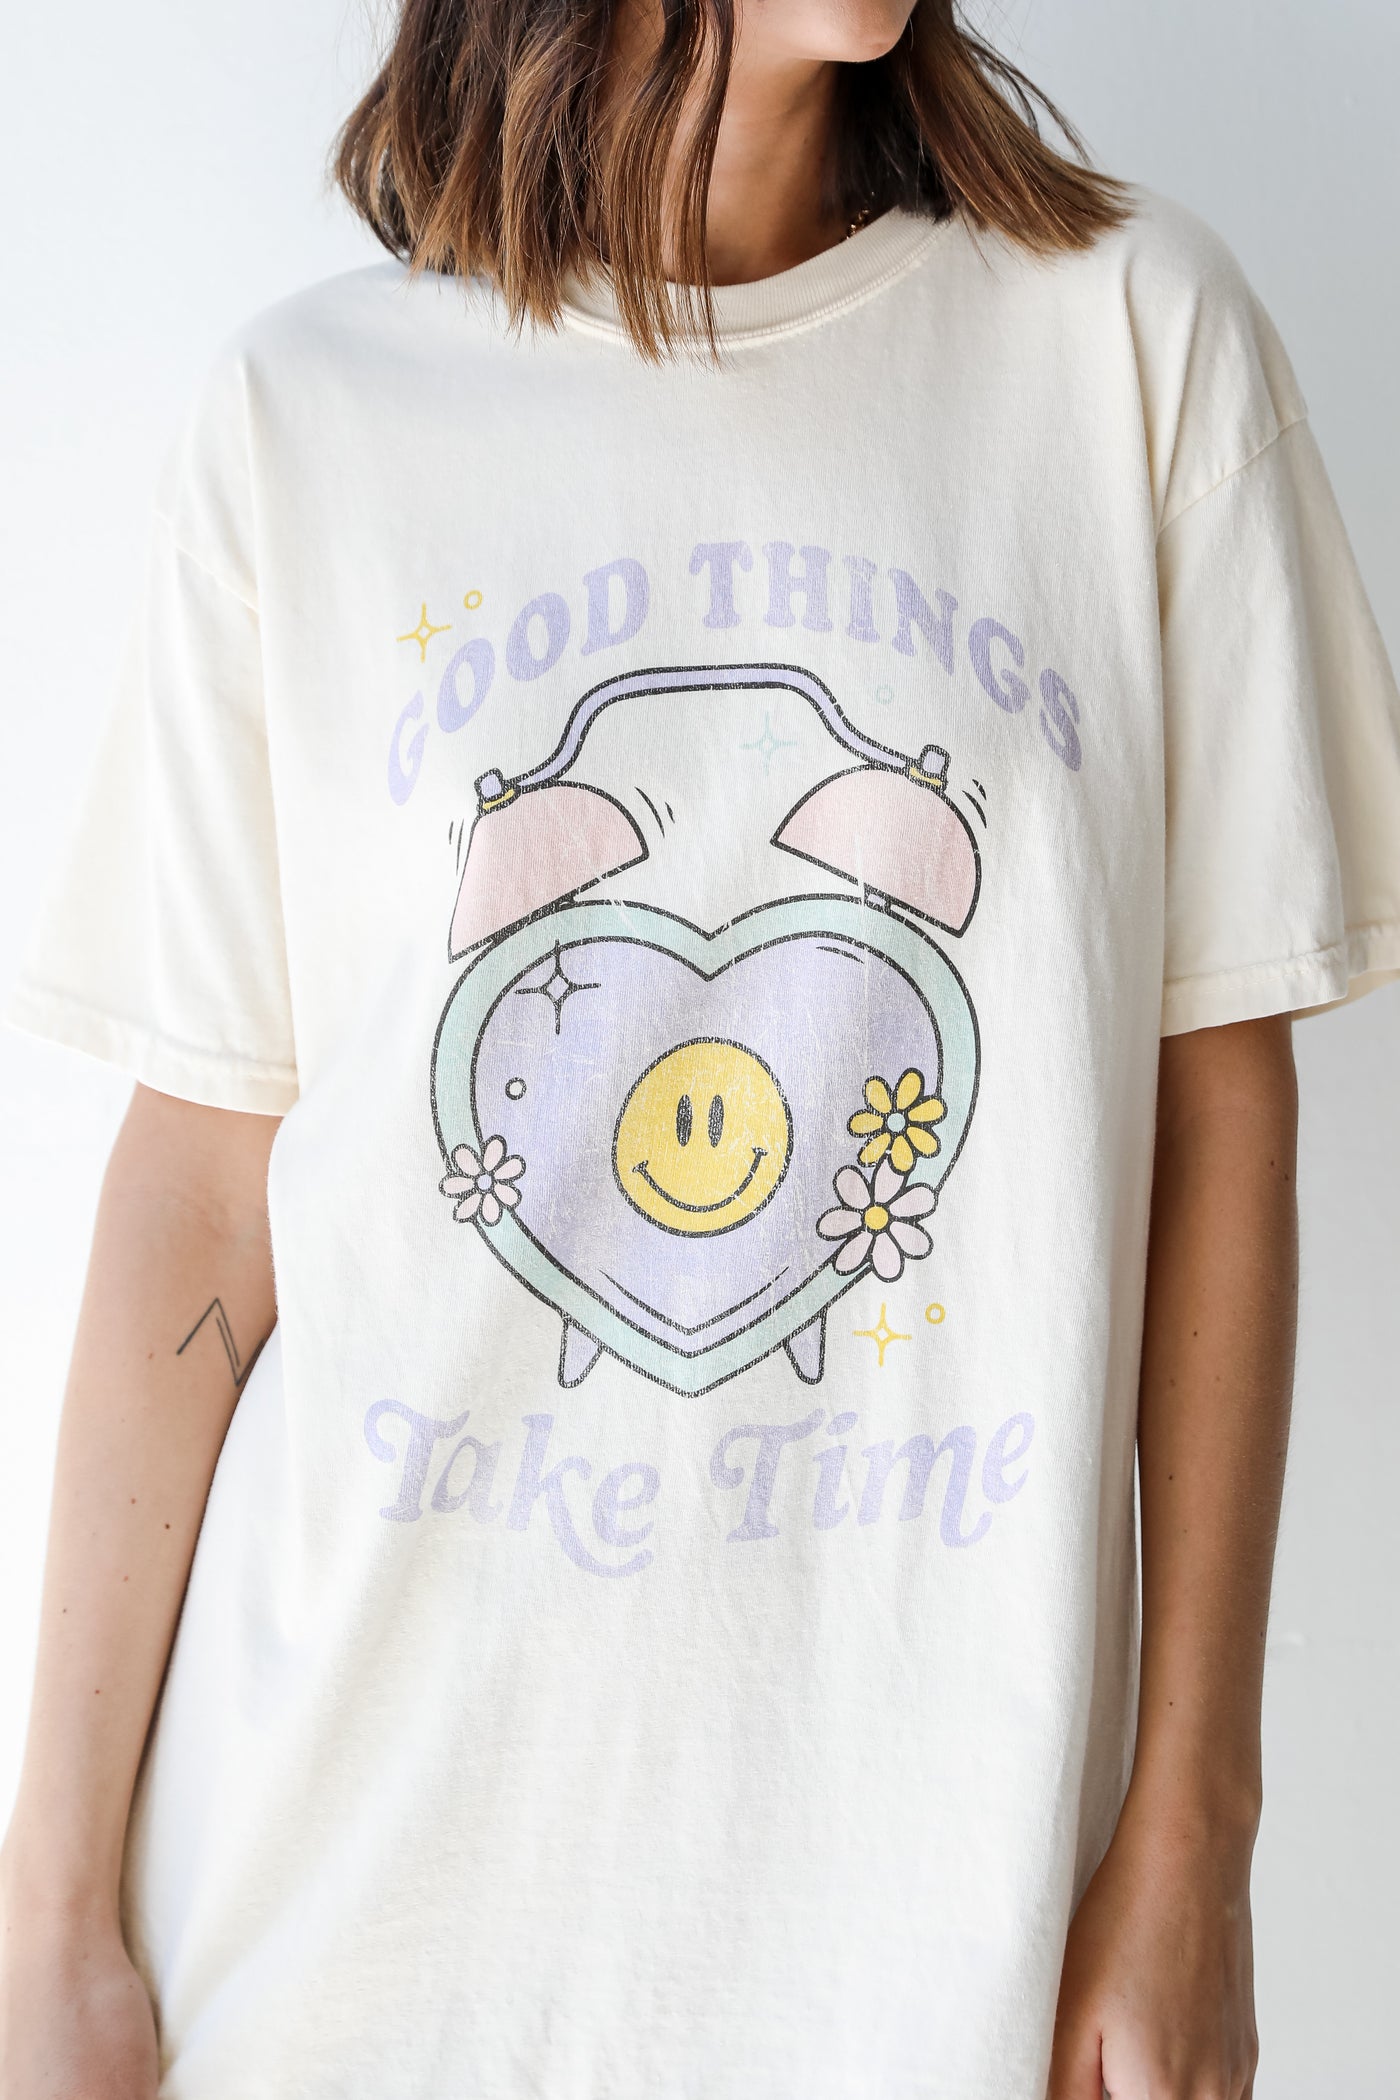 Good Things Take Time Graphic Tee from dress up